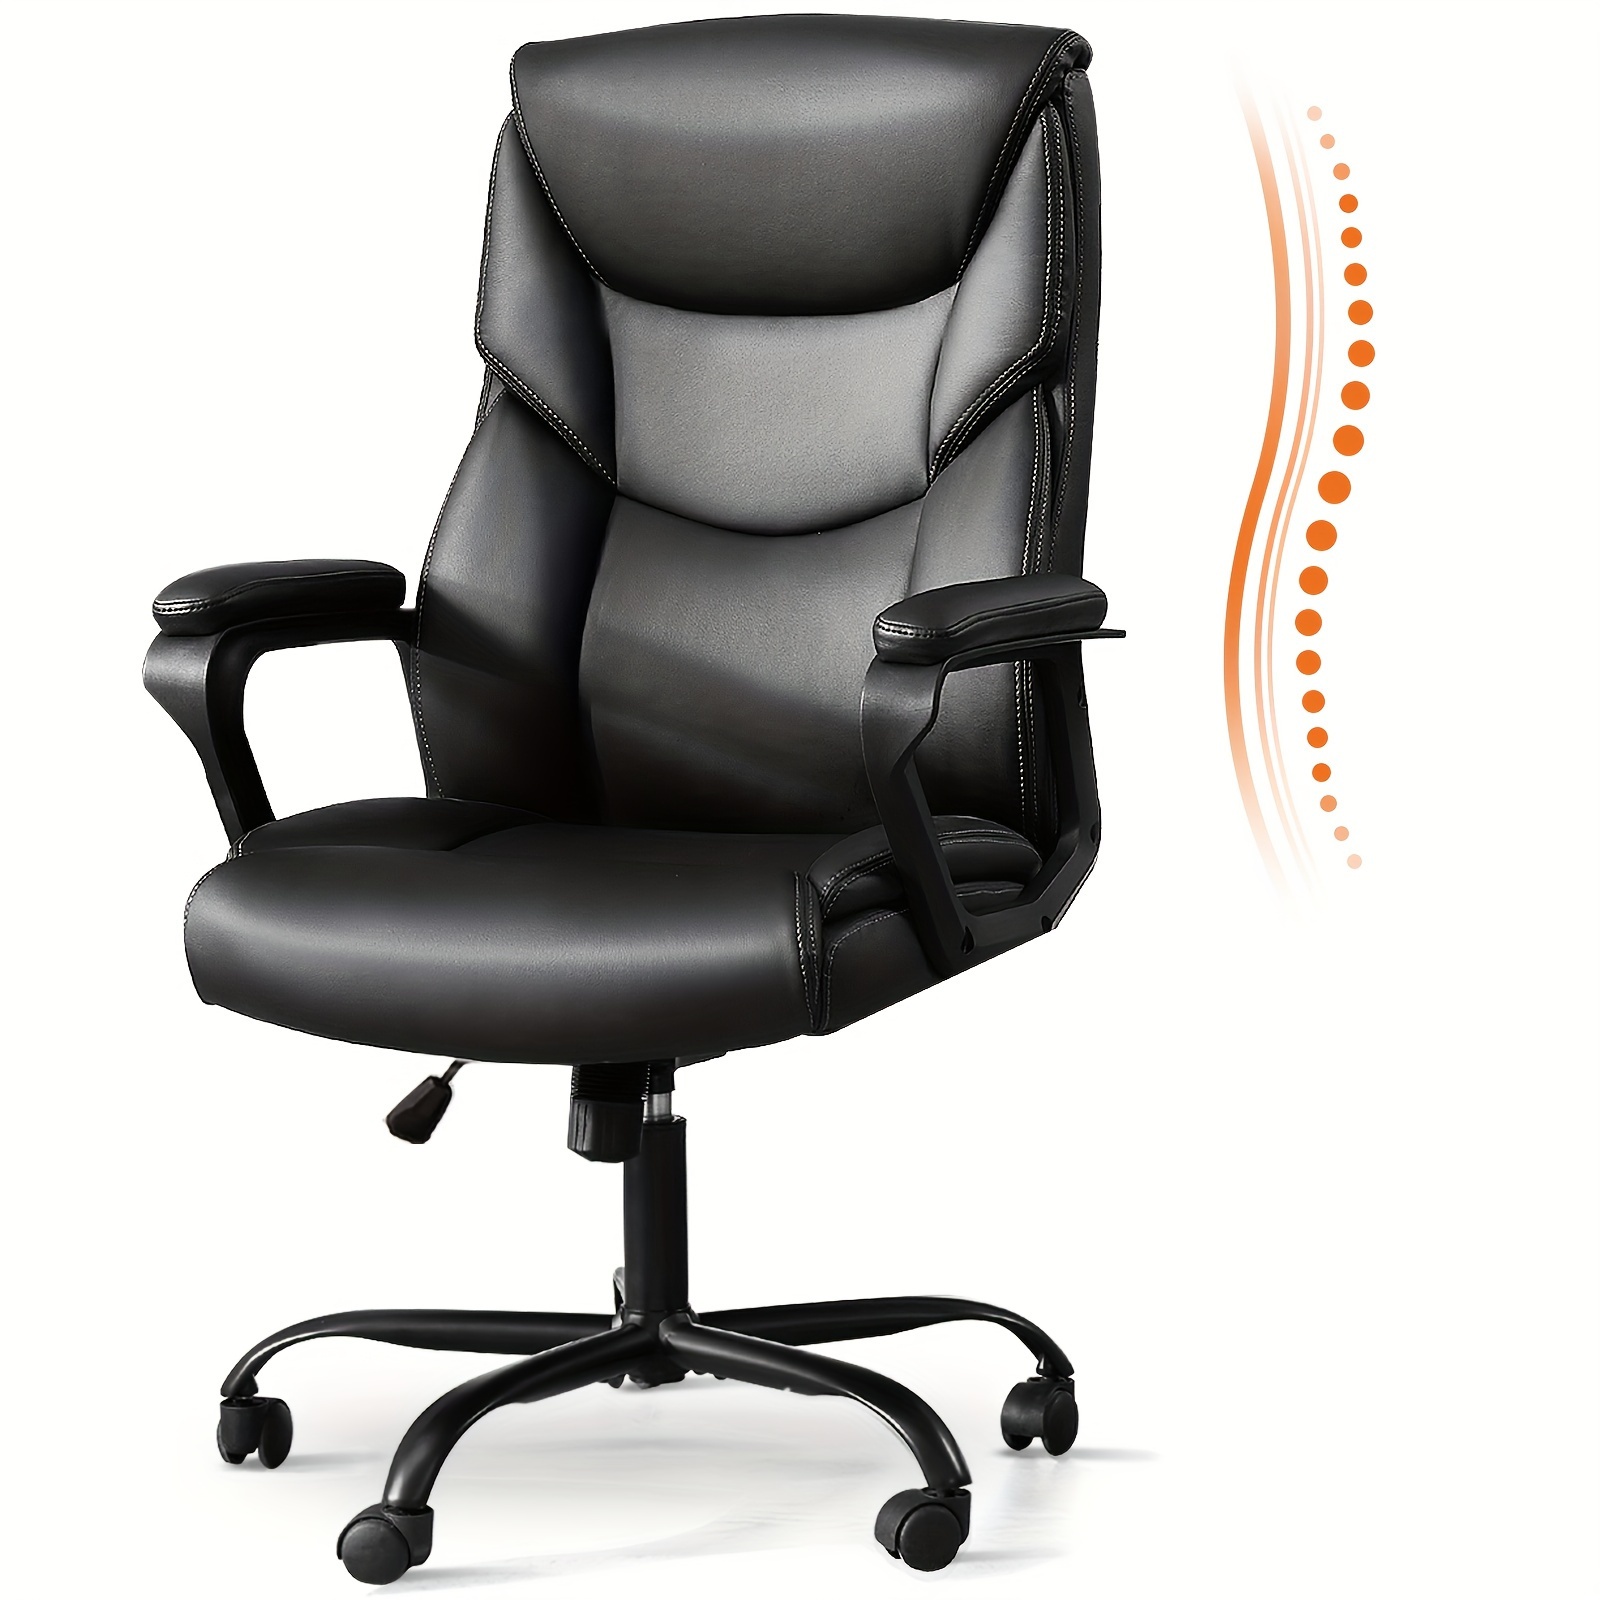 

Executive Office Desk Chair High Back Adjustable Ergonomic Managerial Rolling Swivel Task Computer Pu Leather With Lumbar Support